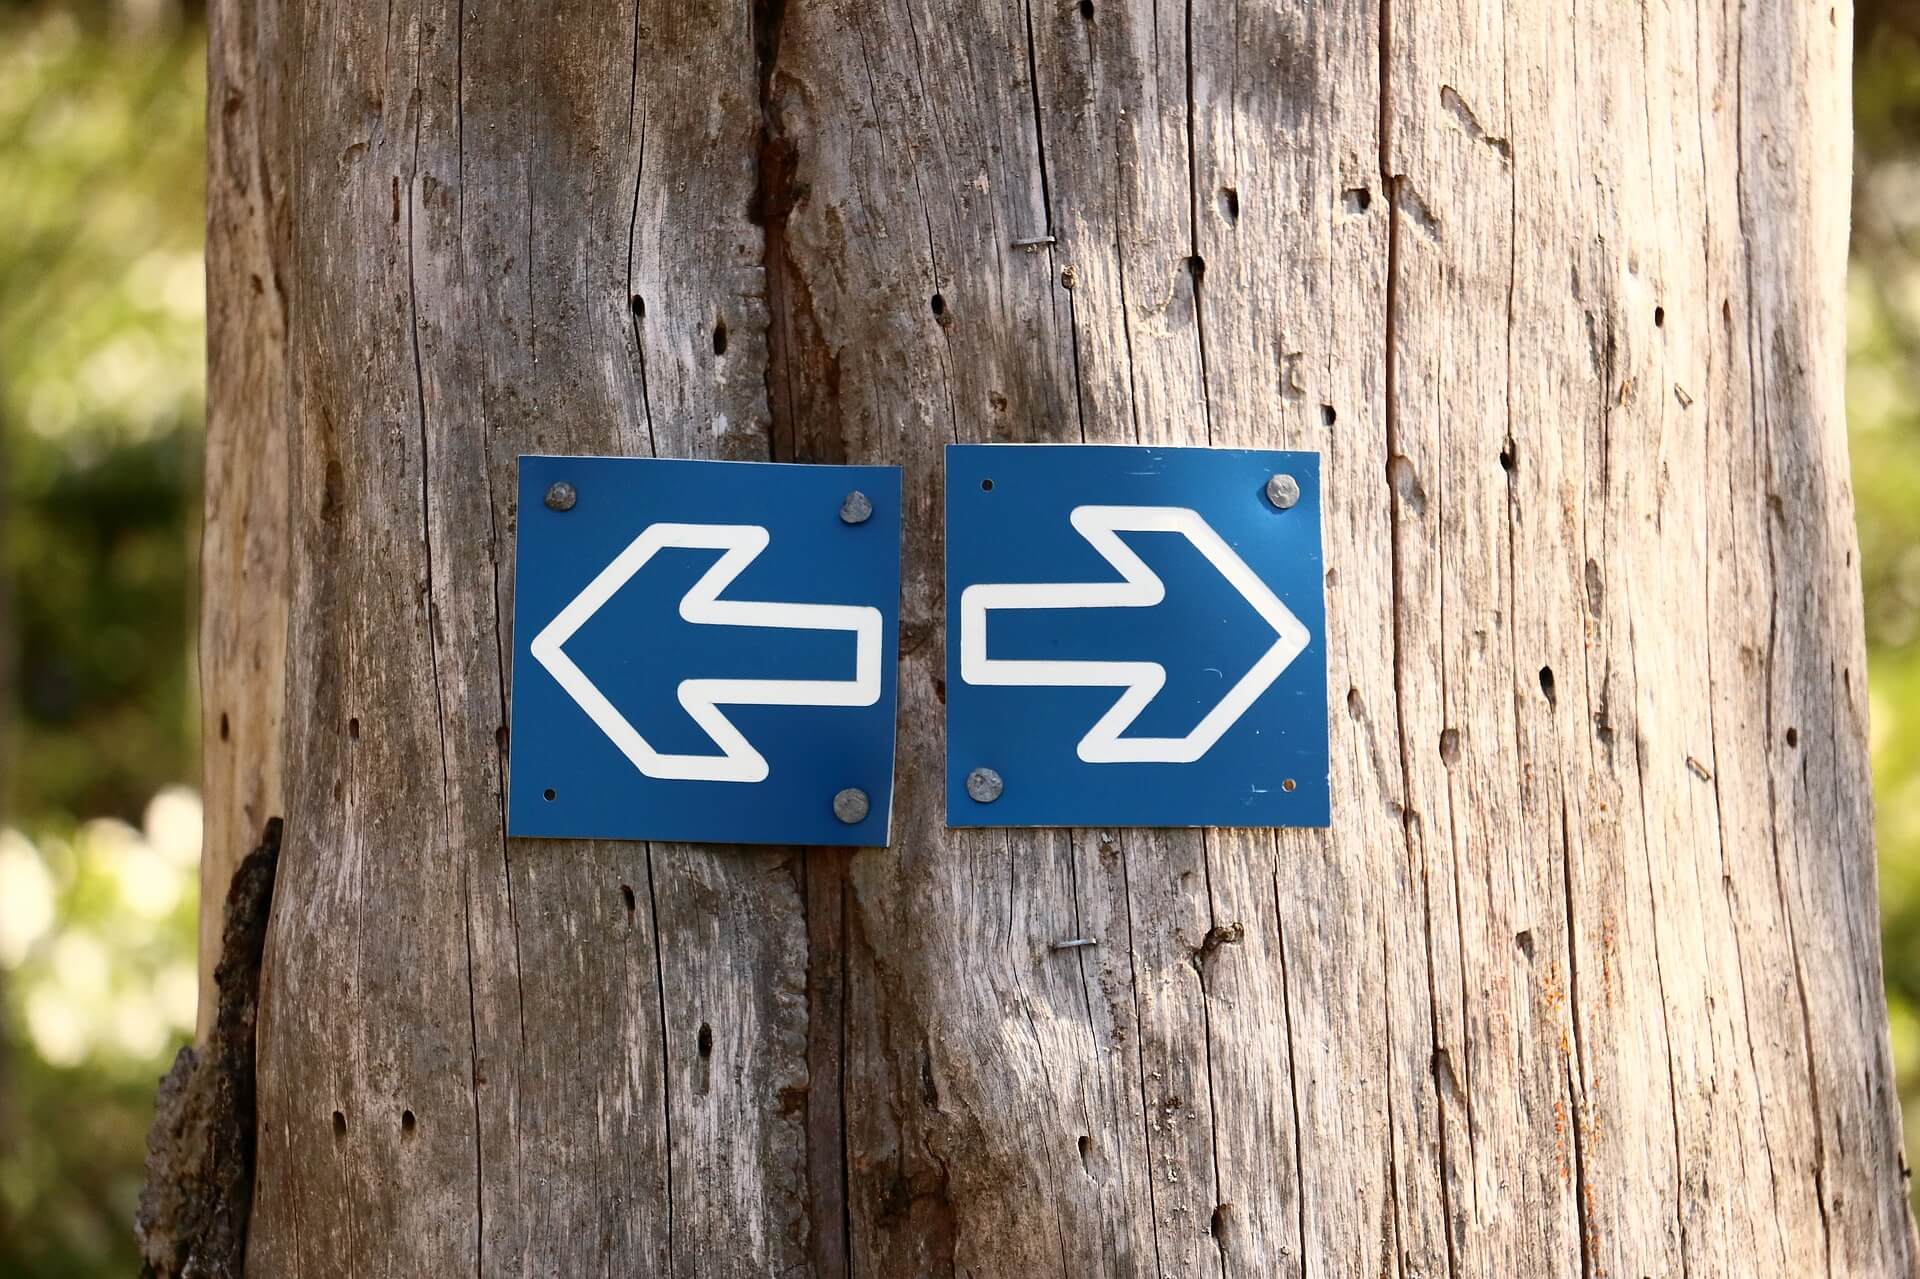 Arrow signs pointing left and right